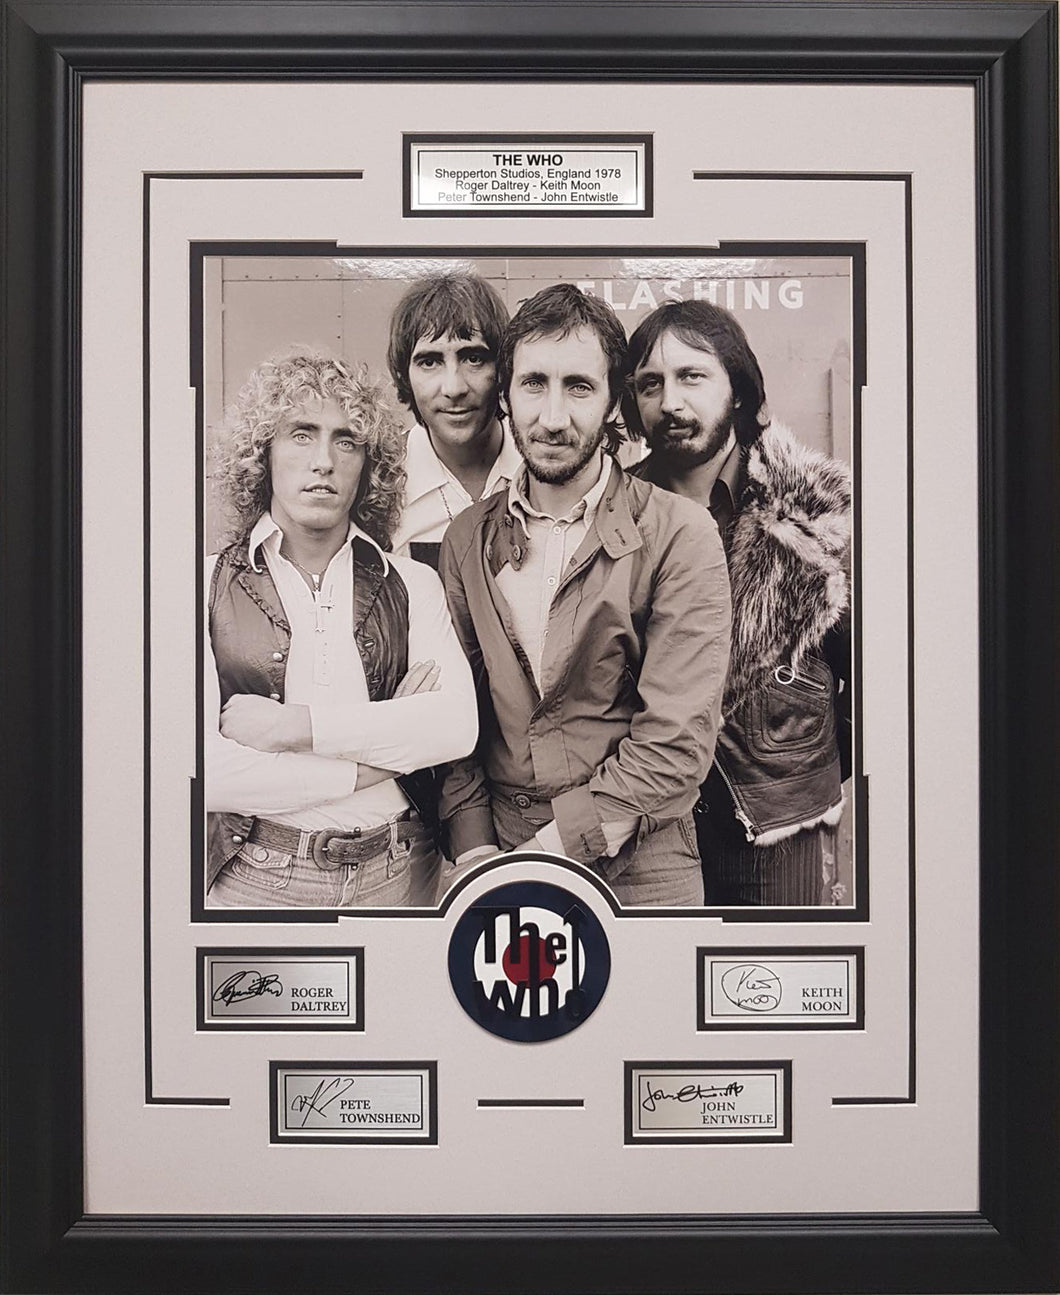 The Who Framed Collage